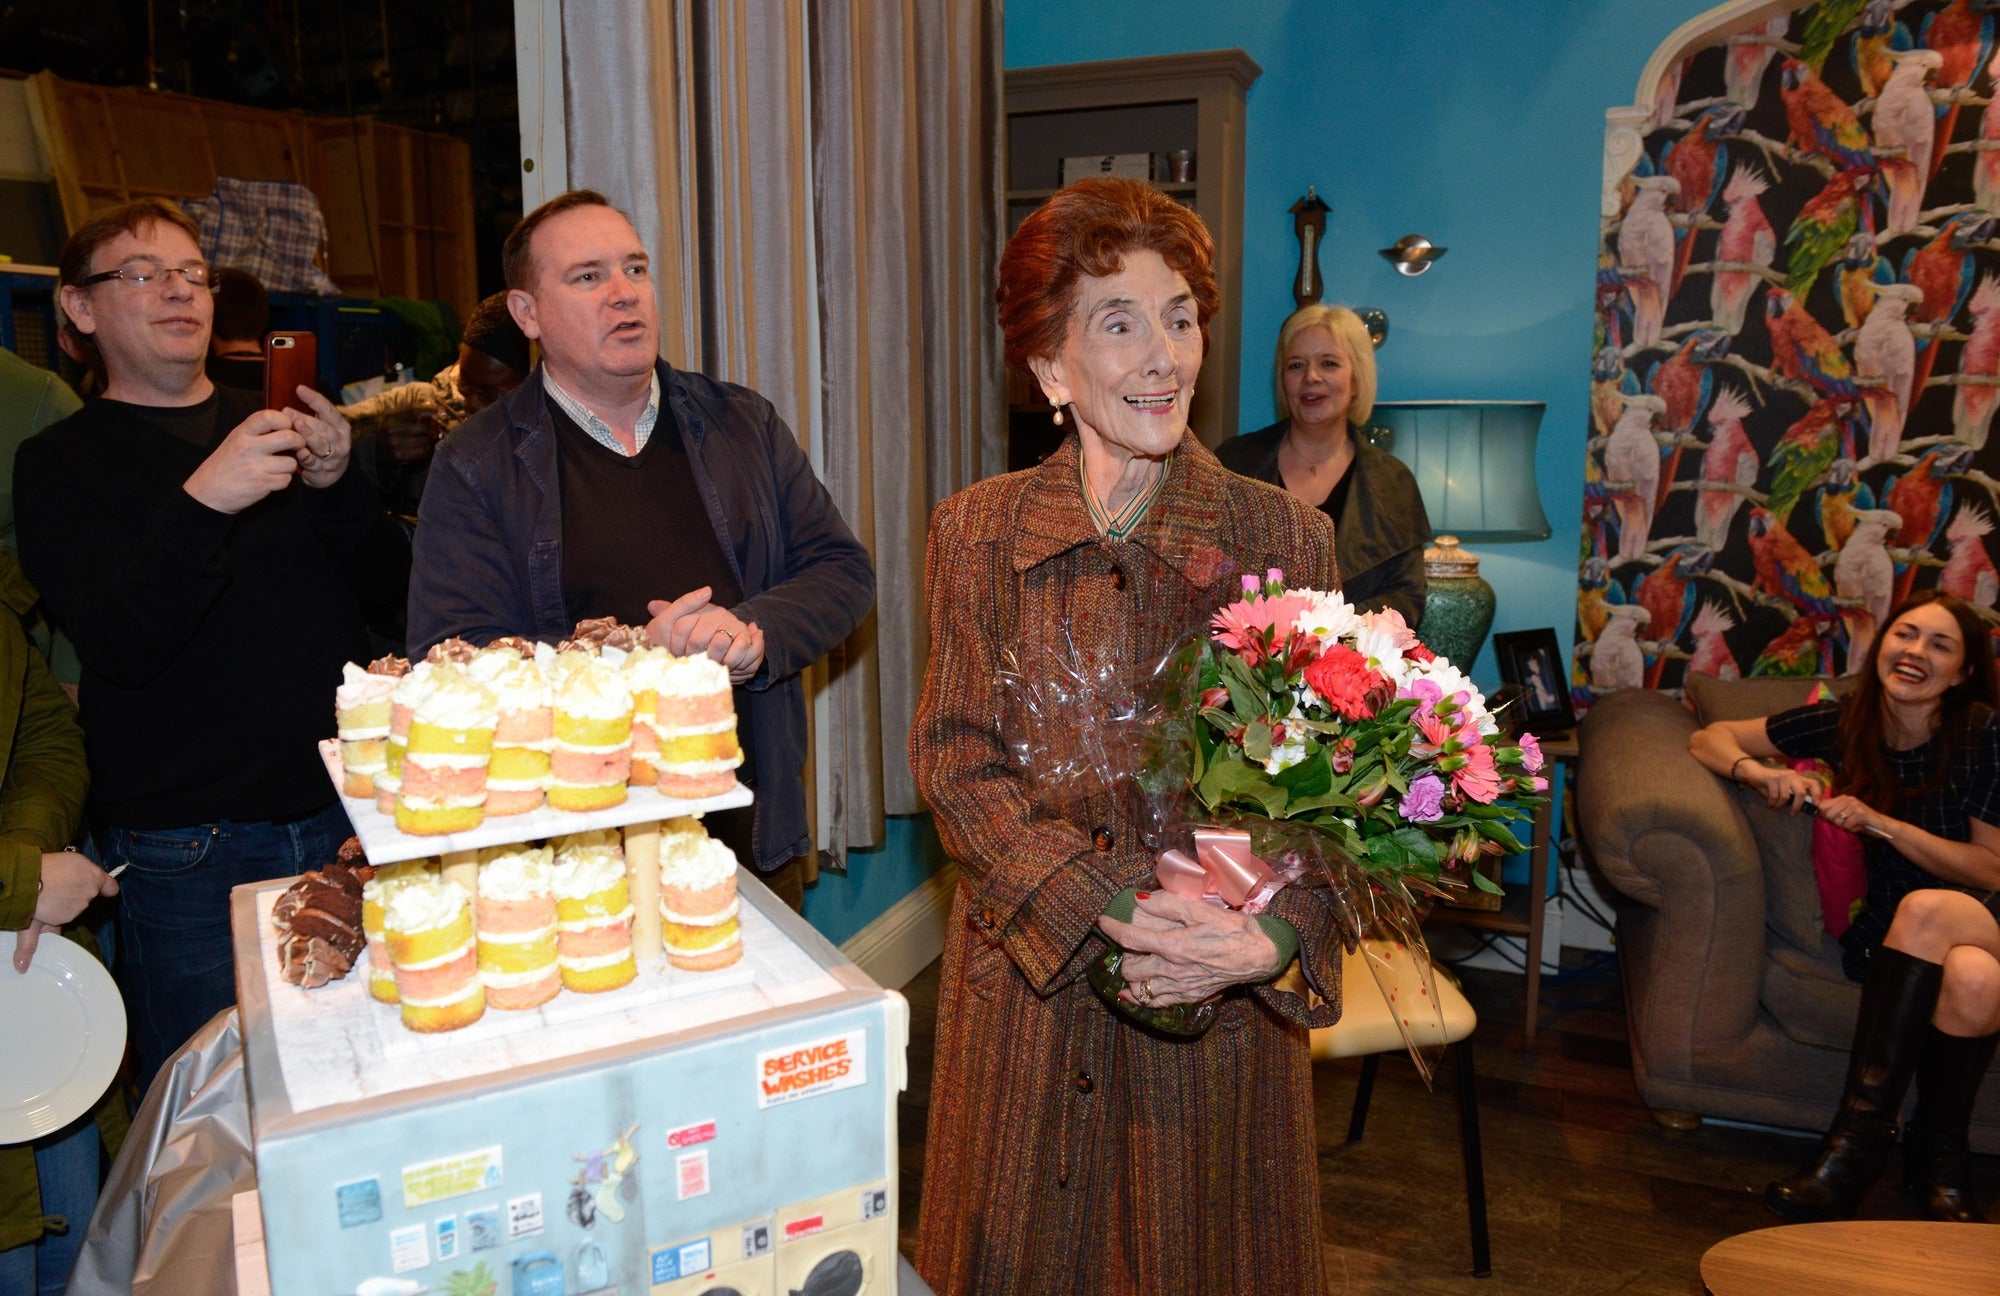 Adam Woodyatt, Sean O’Connor, Sharon Batten and Lacey Turner surprise June Brown with cake and flowers to help her celebrate her 90th birthday on the set of EastEnders (Kieron McCarron/PA)